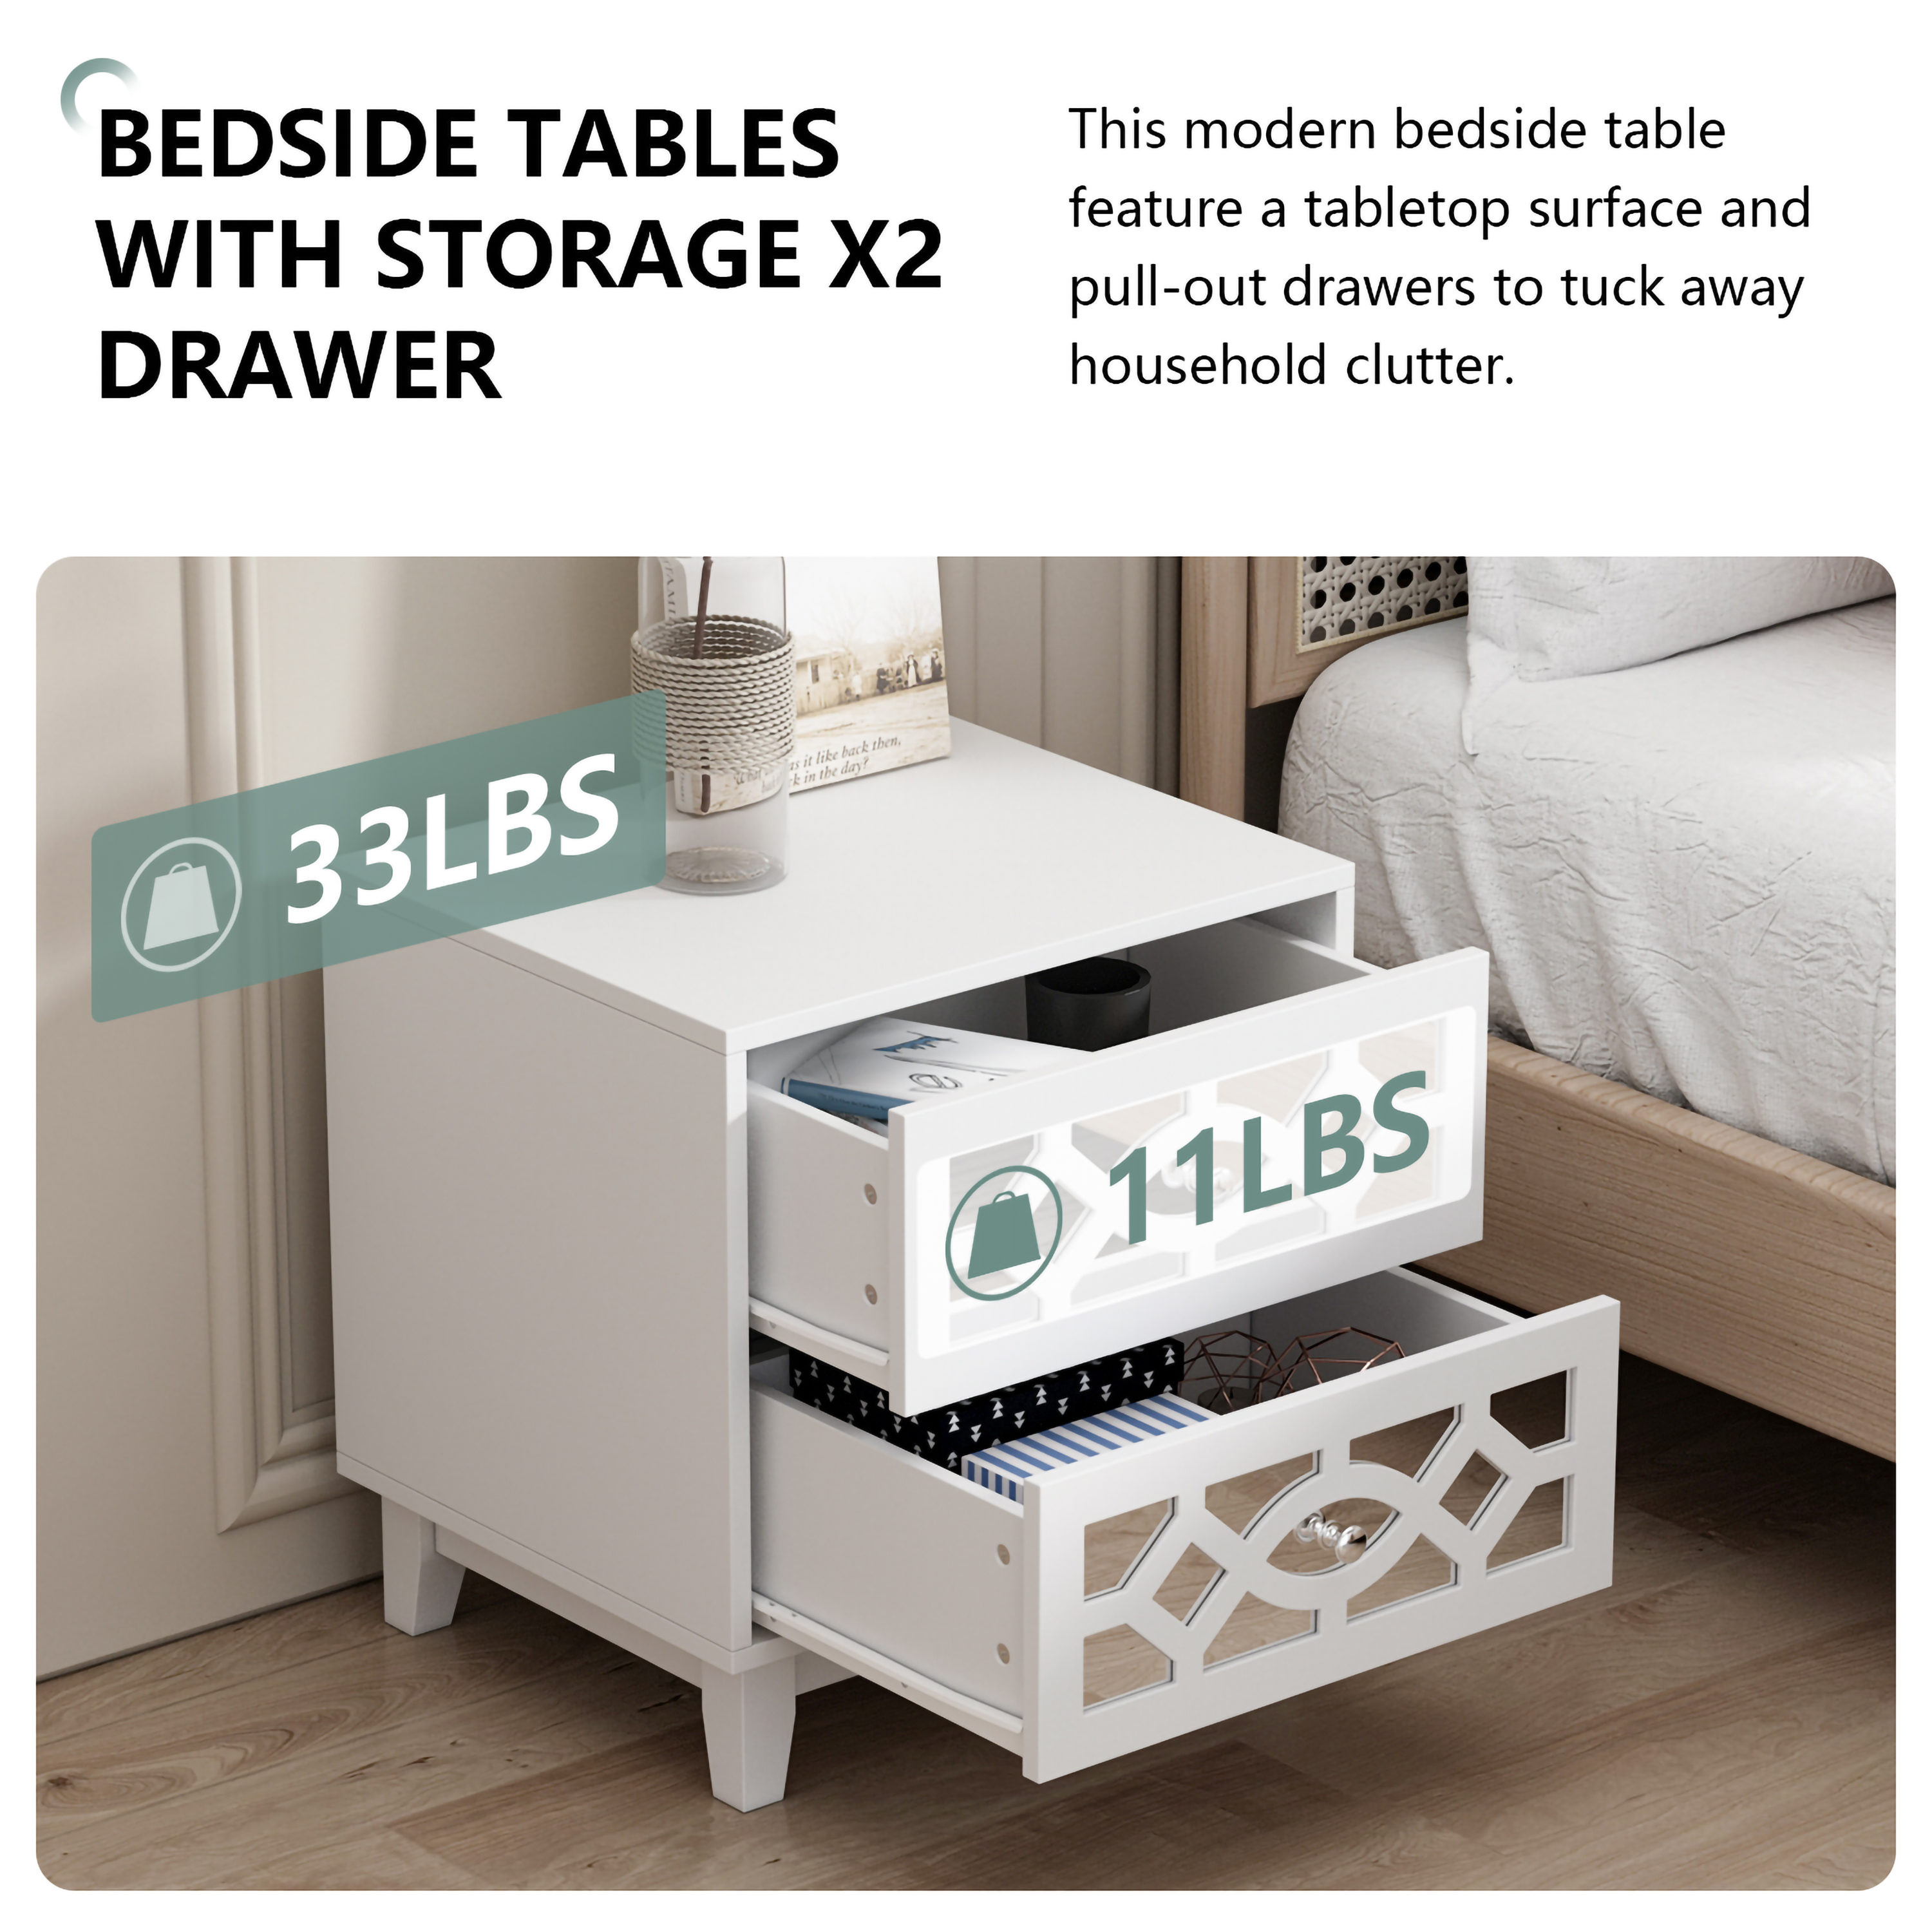 FUFU&GAGA 2-Drawer White Nightstands Side Table Bedside Table 18.9 in. H x  15.7 in. W x 11.6 in. D KF200150-01 - The Home Depot